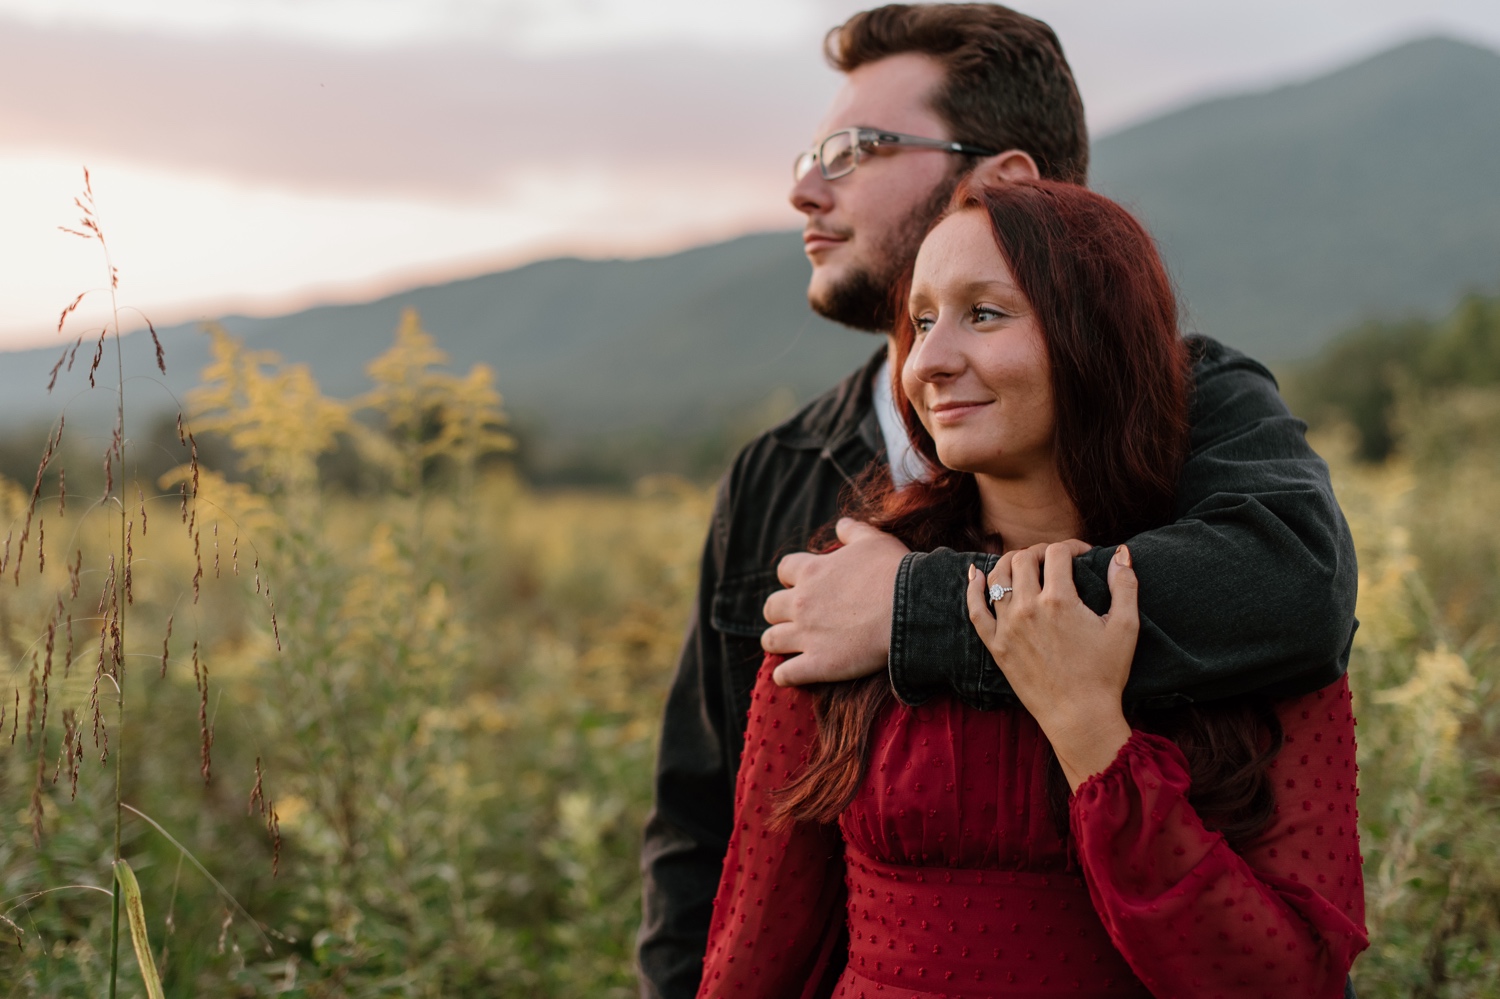 Cades Cove Engagement Photography Great Smoky Mountains National Park